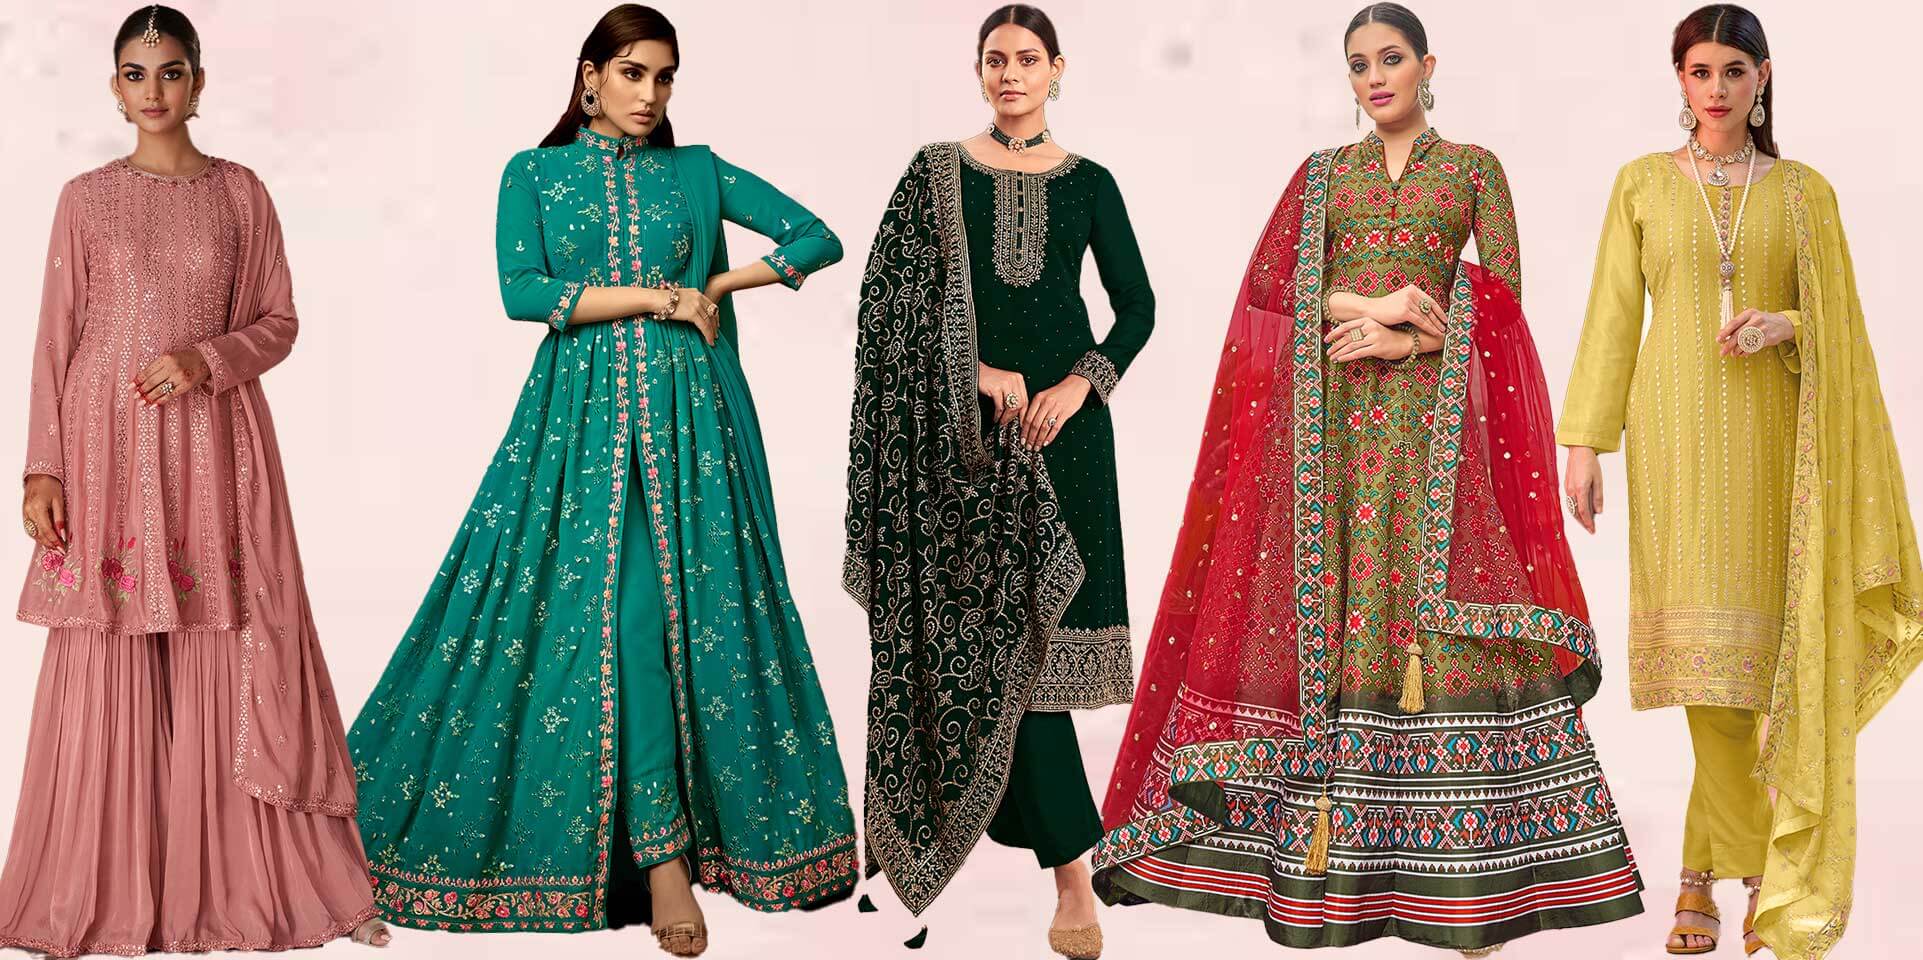 What is the Best Place to Buy EID Dresses for Women Online in the USA, UK, Canada, and Worldwide in 2023?